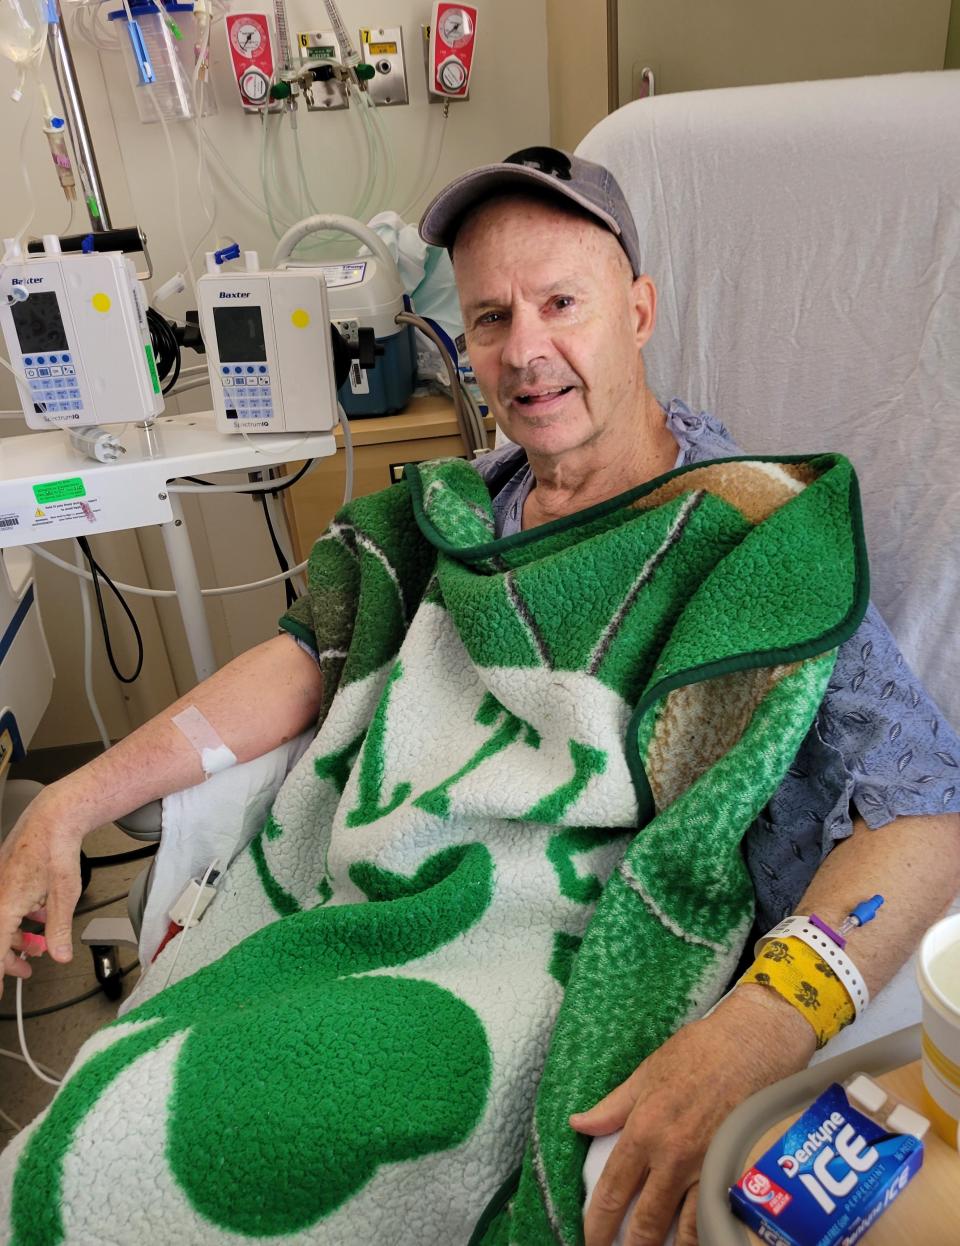 Jim Evans' Celtics blanket buoyed his spirits through chemotherapy treatments at Dana-Farber Cancer Institute.